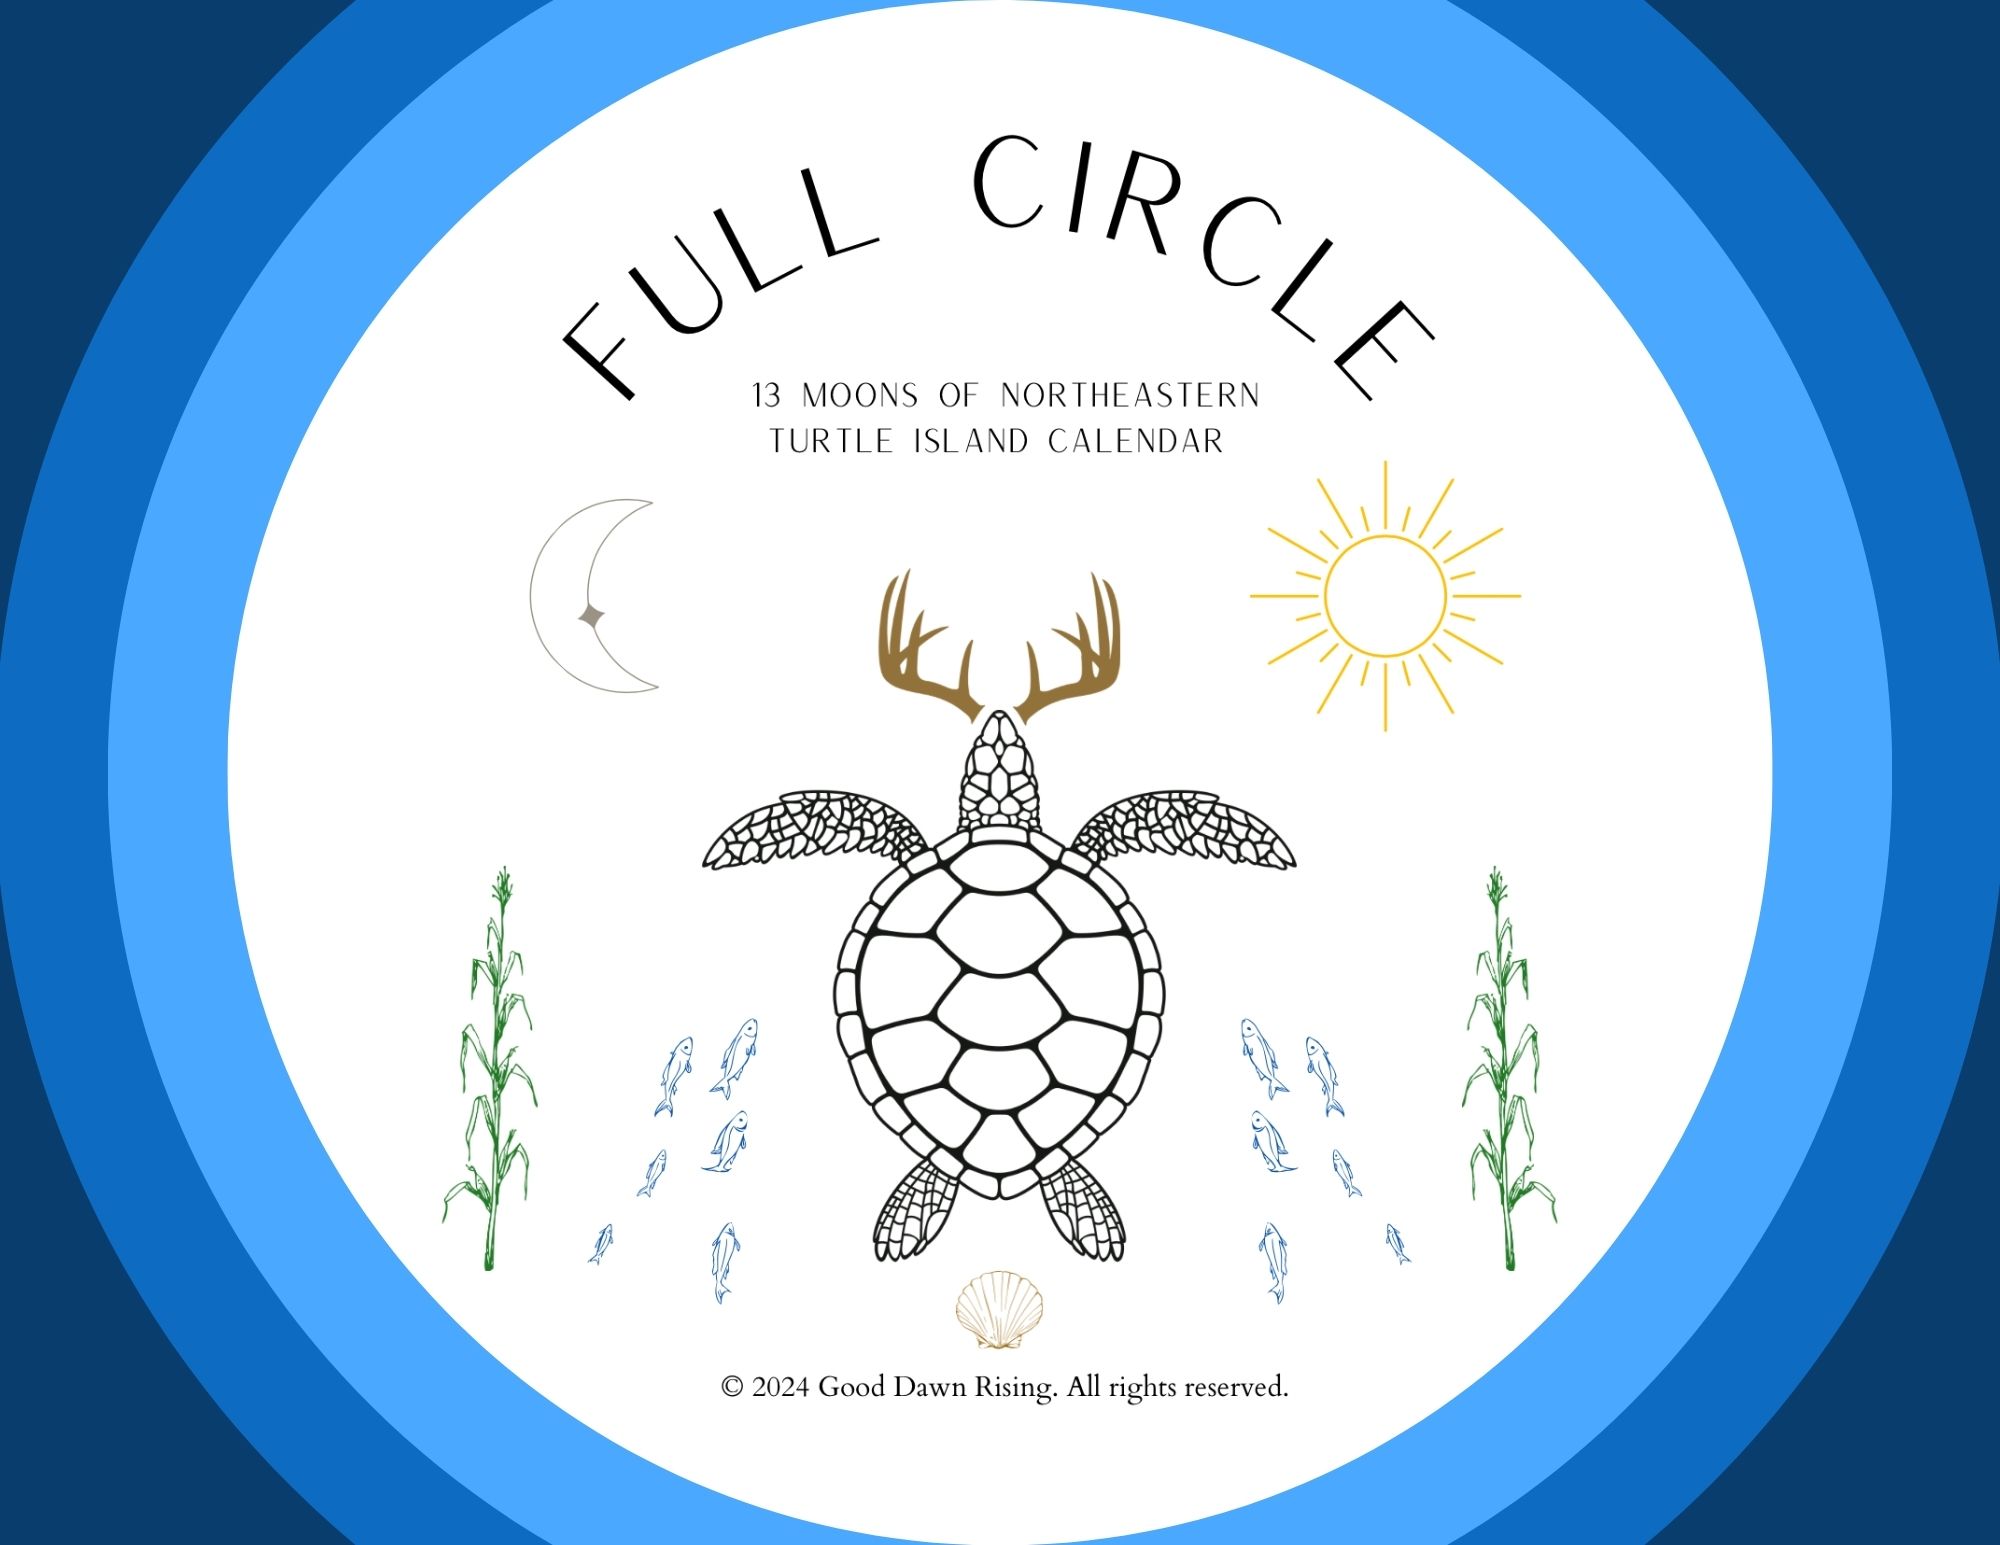 *Preorder* SECOND EDITION Full Circle 13 Moons of Northeastern Turtle Island Calendar (physical copy)